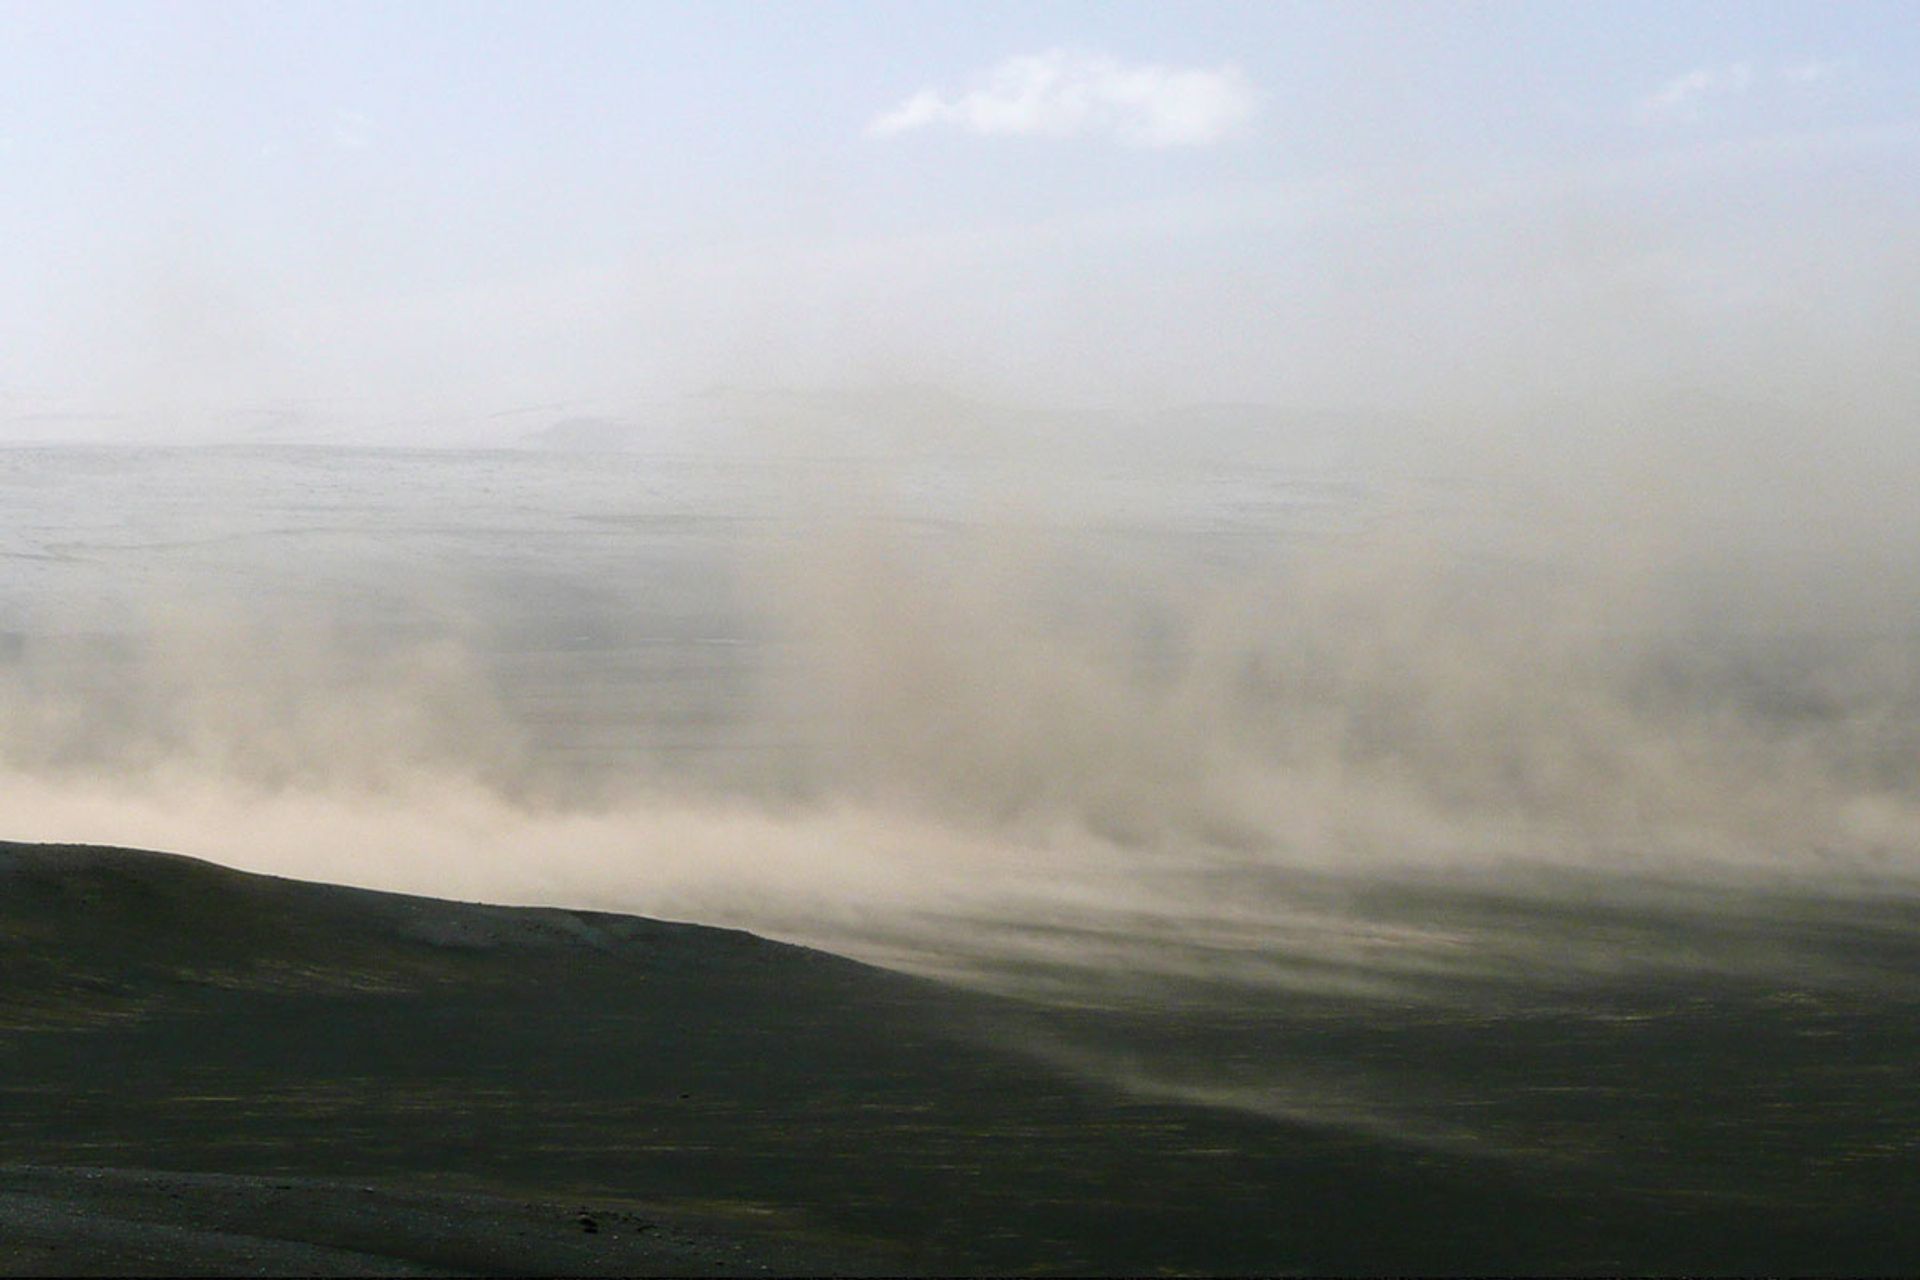 Driving in Iceland with volcanic ash and sand storm